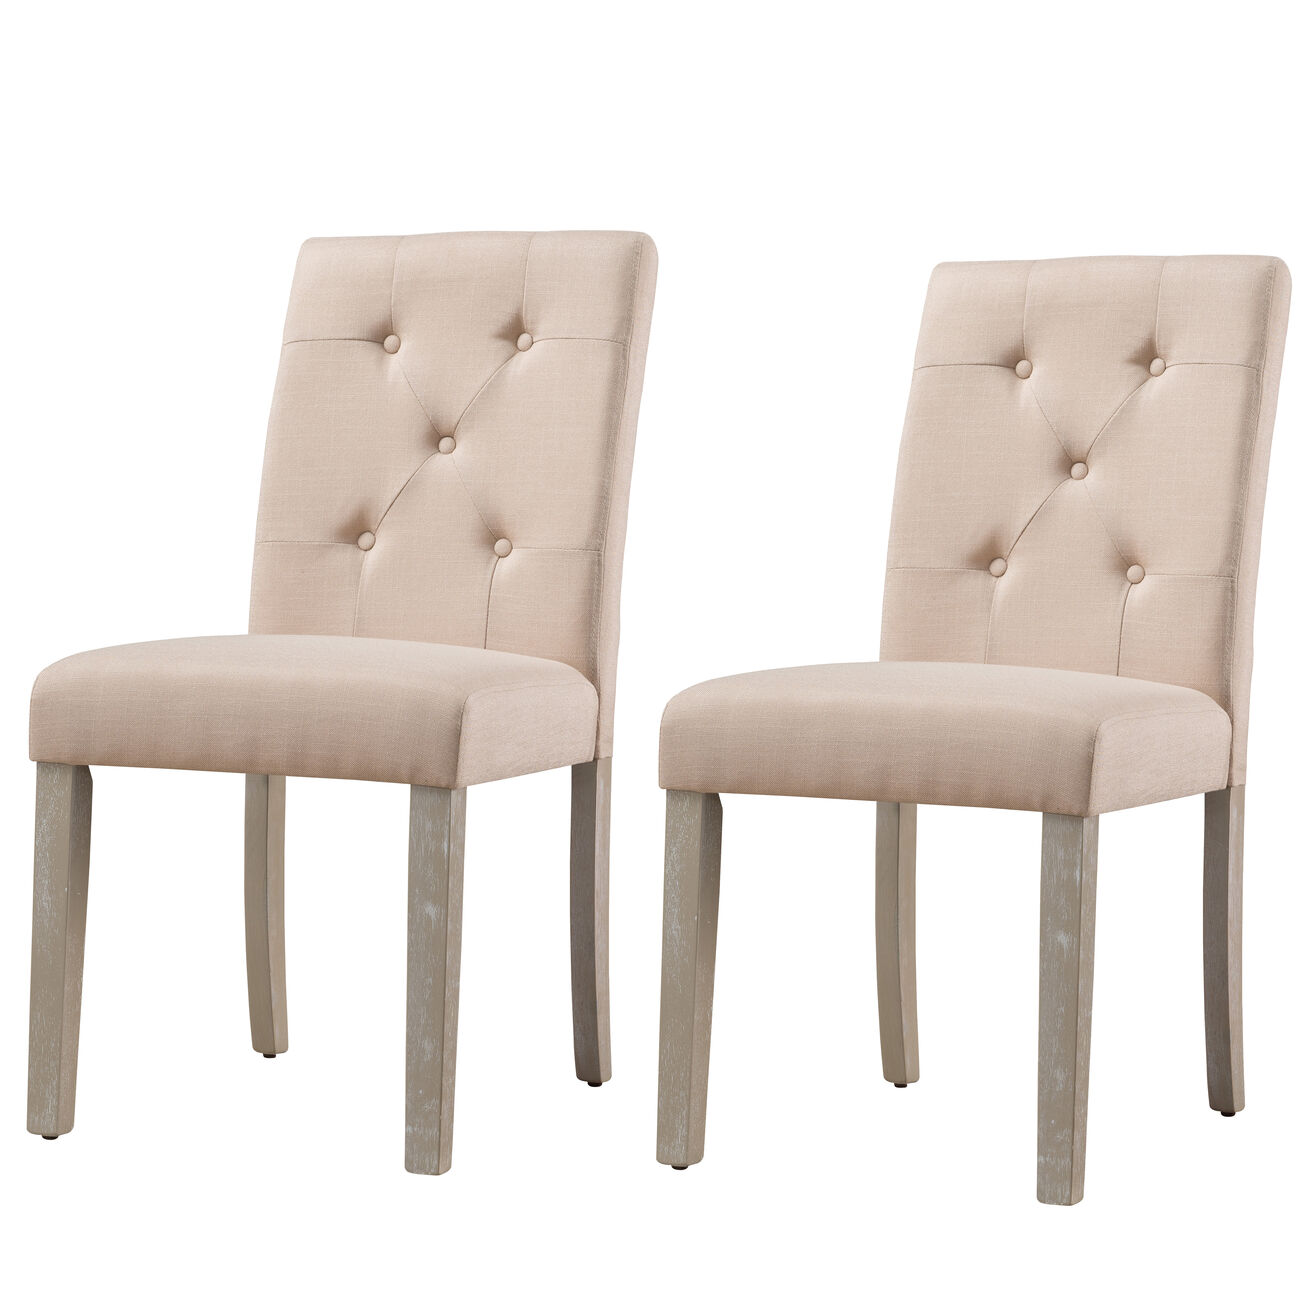 Fabric Upholstered Tufted Dining Chair, Set of 2, Beige and Gray